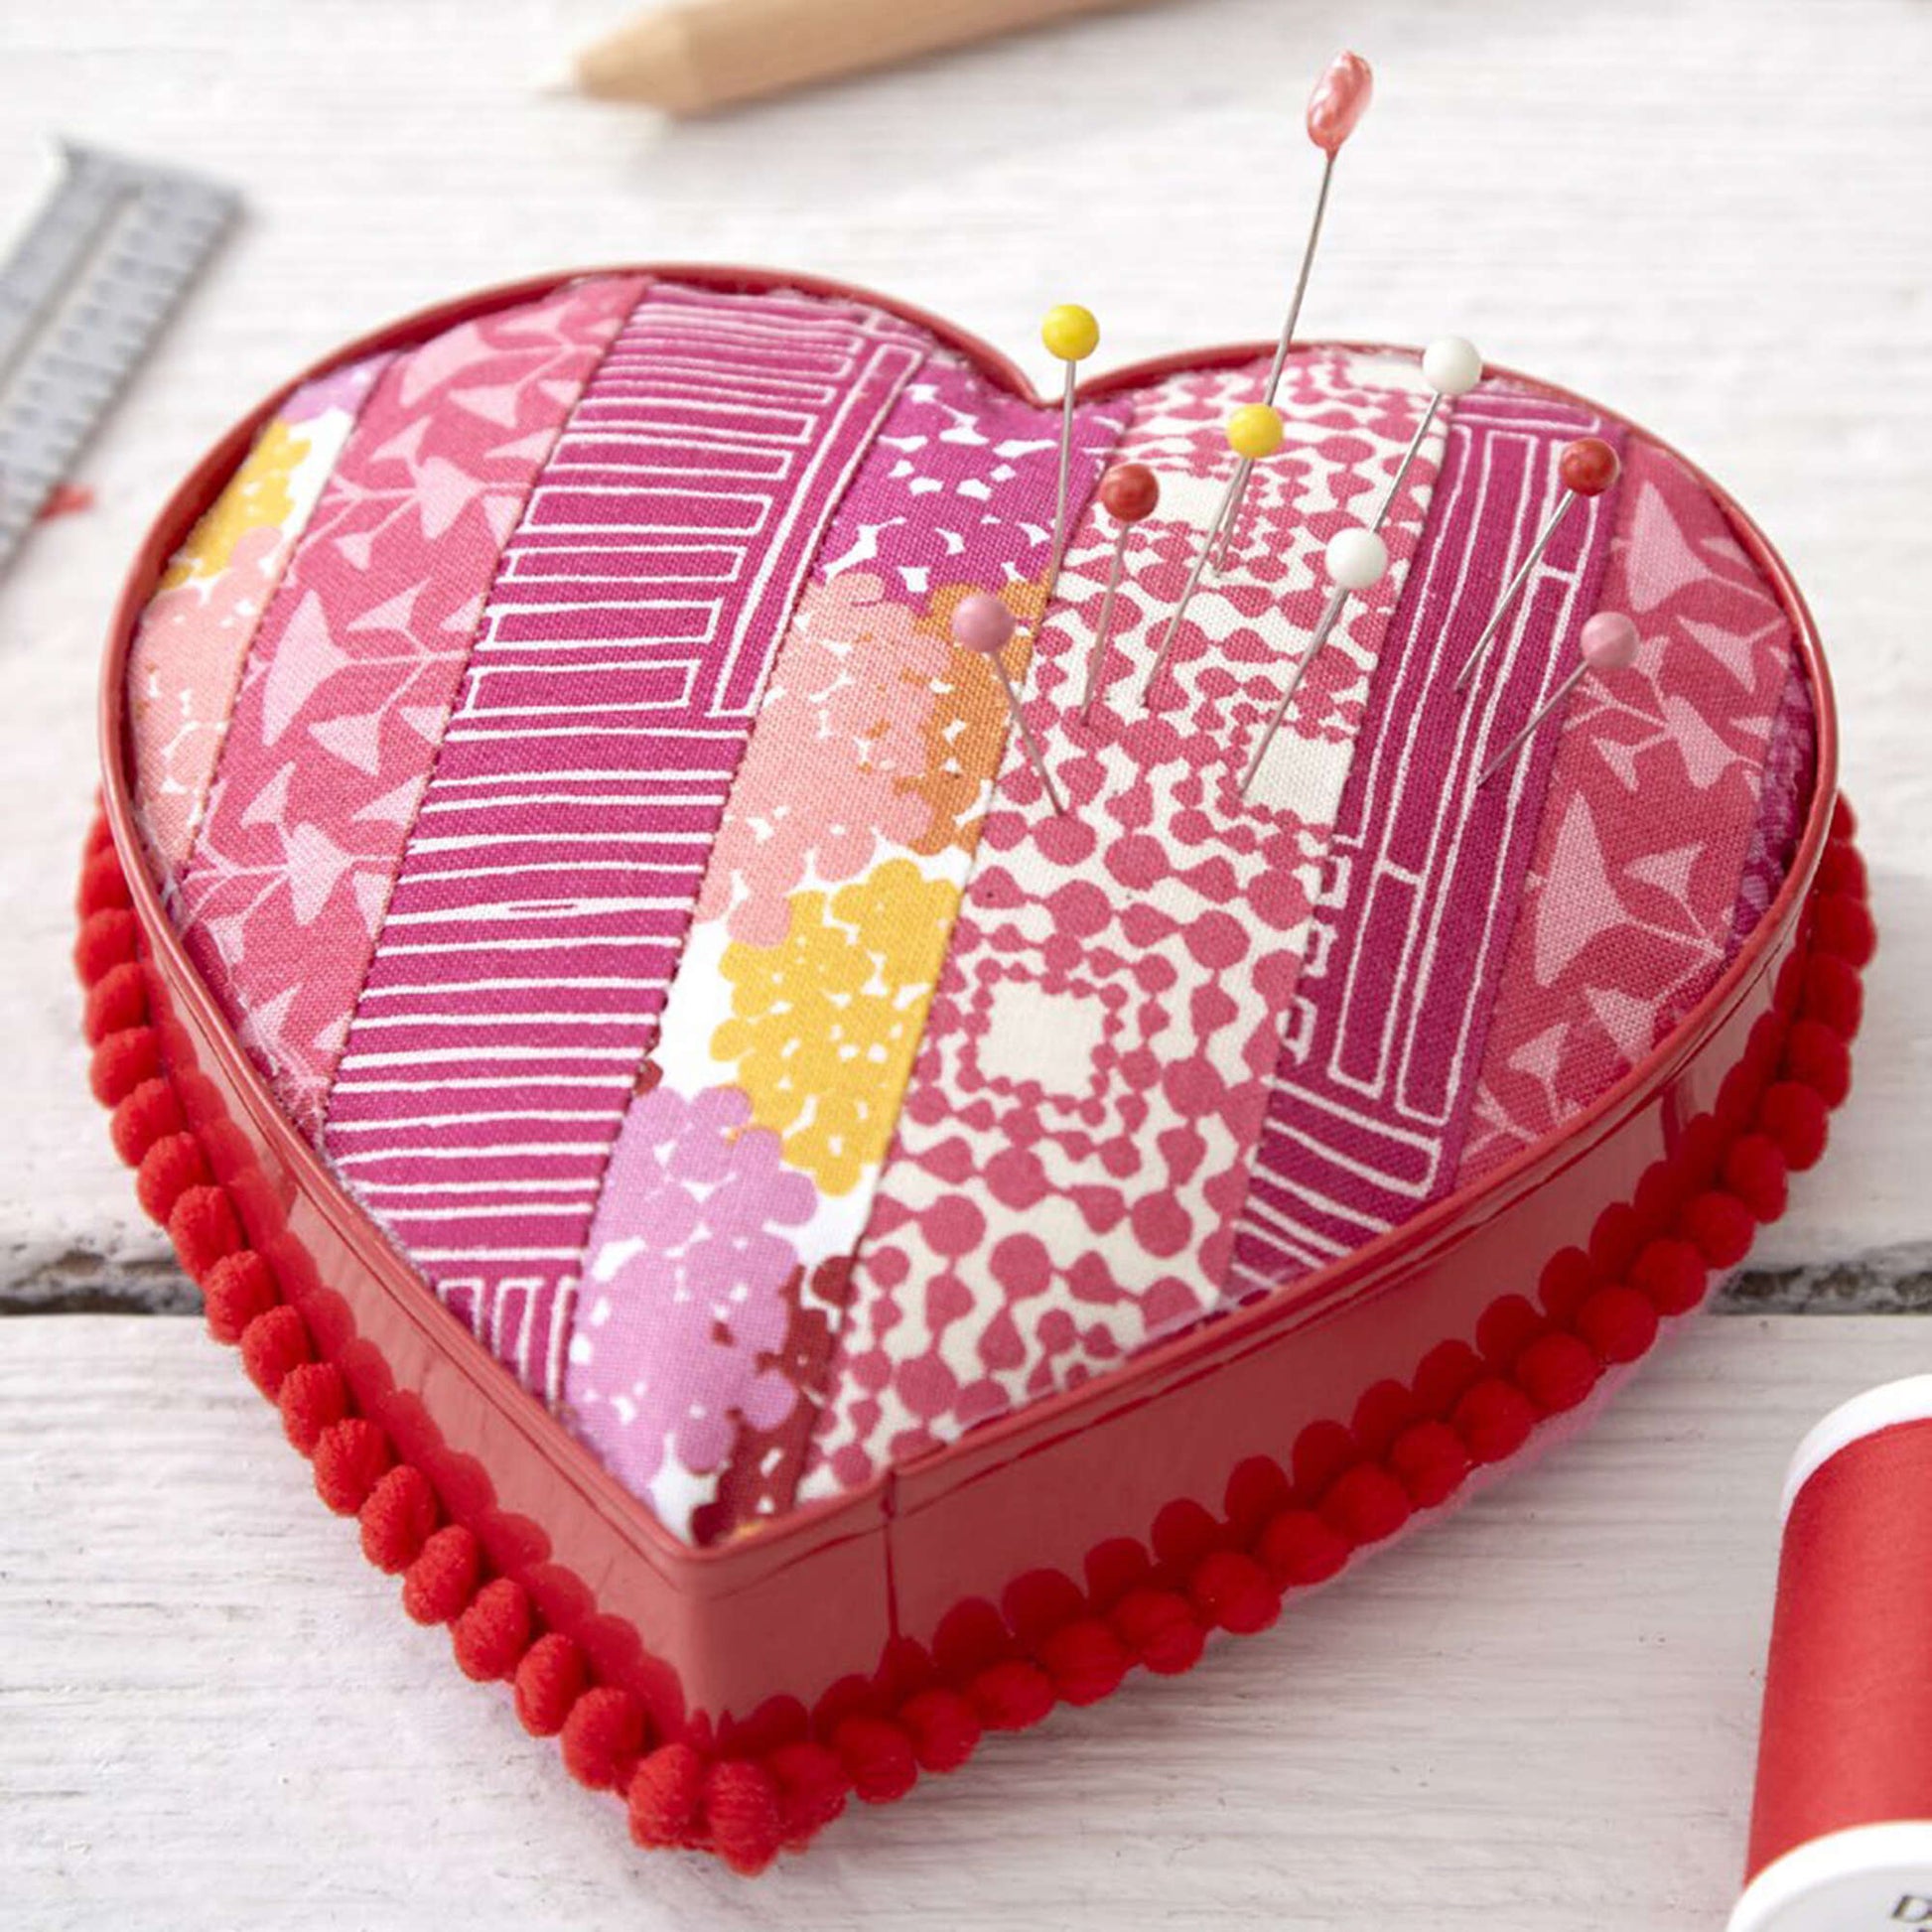 Free Coats Quilting & Clark Pinned To My Heart Pin Cushion Made From Cookie Cutter Pattern